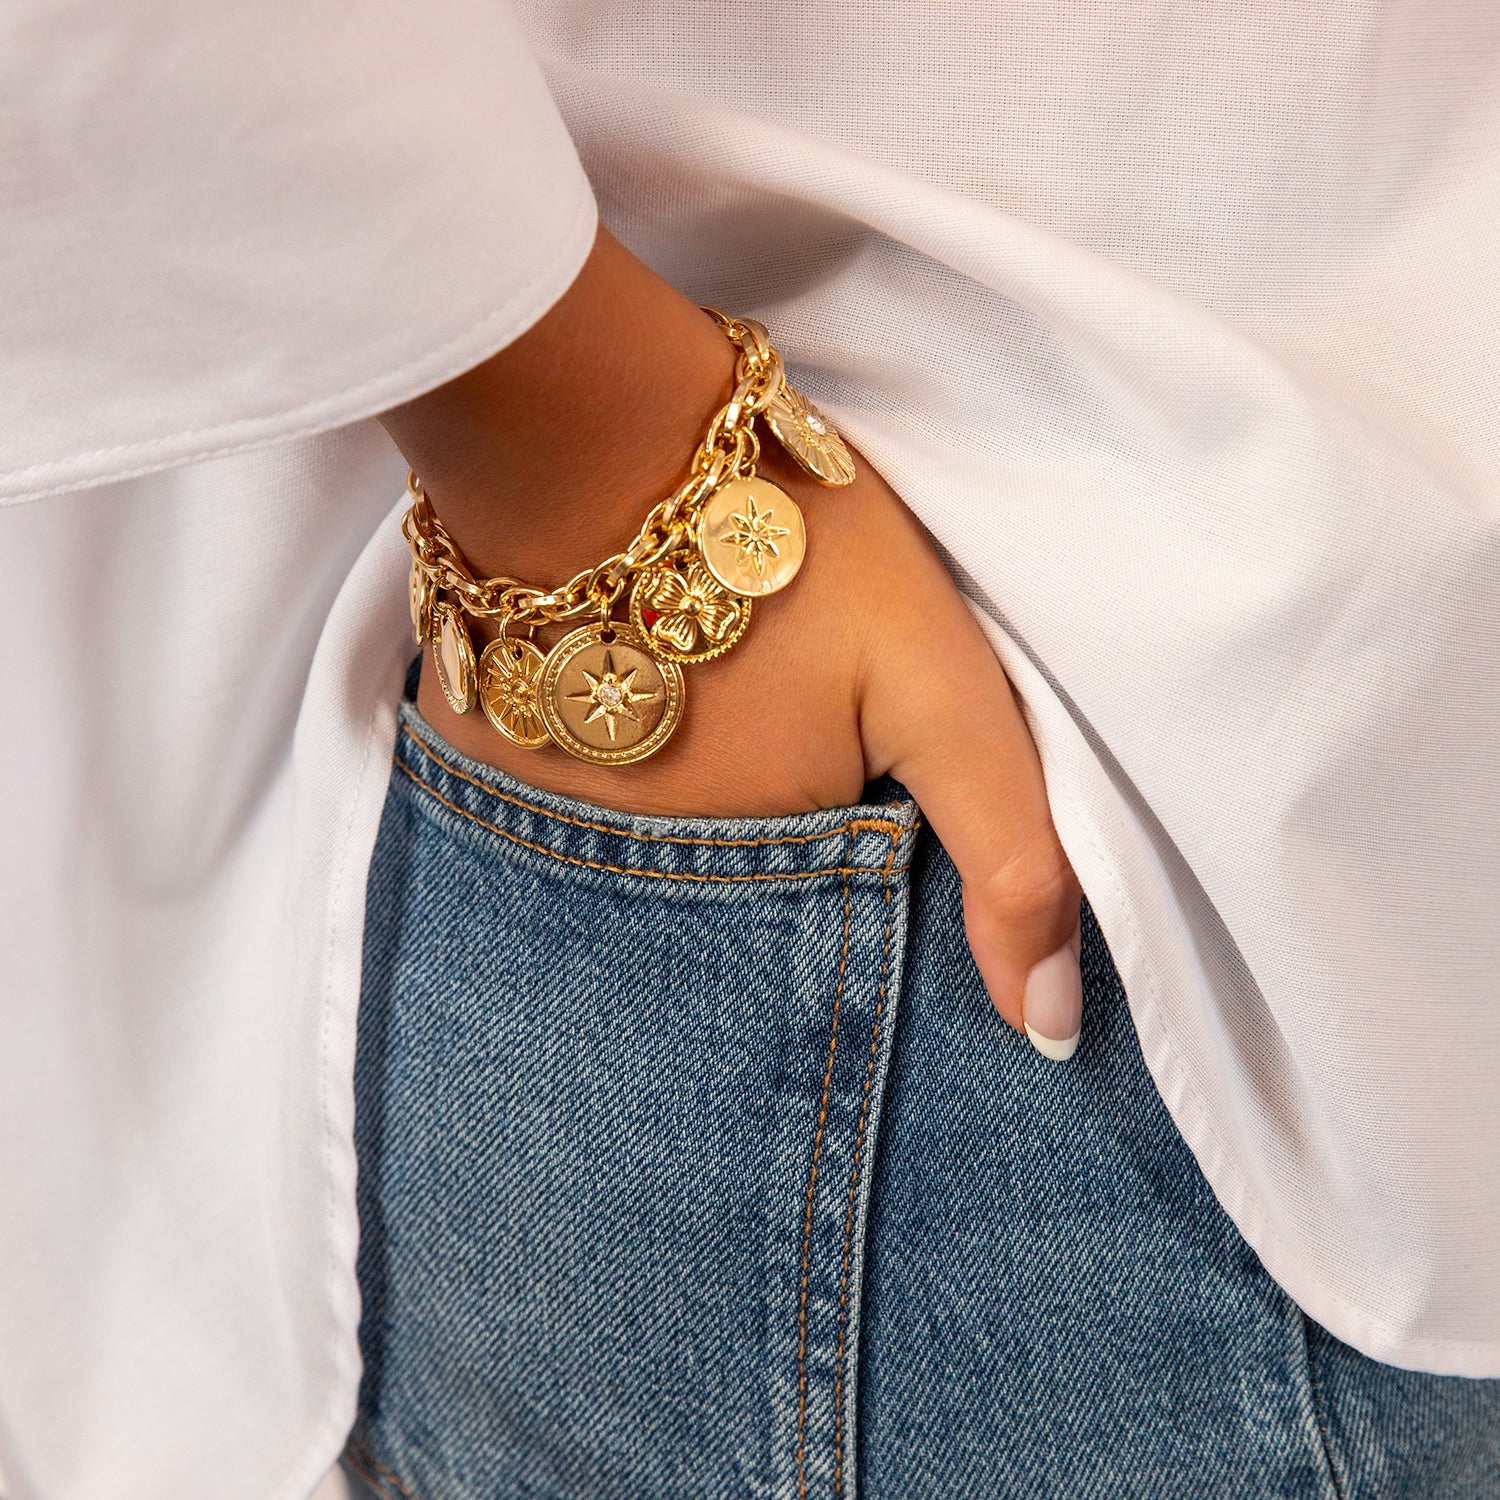 Thick link bracelet with coin charm -Women-Gold-Gift-Fashion- By Karine  Sultan